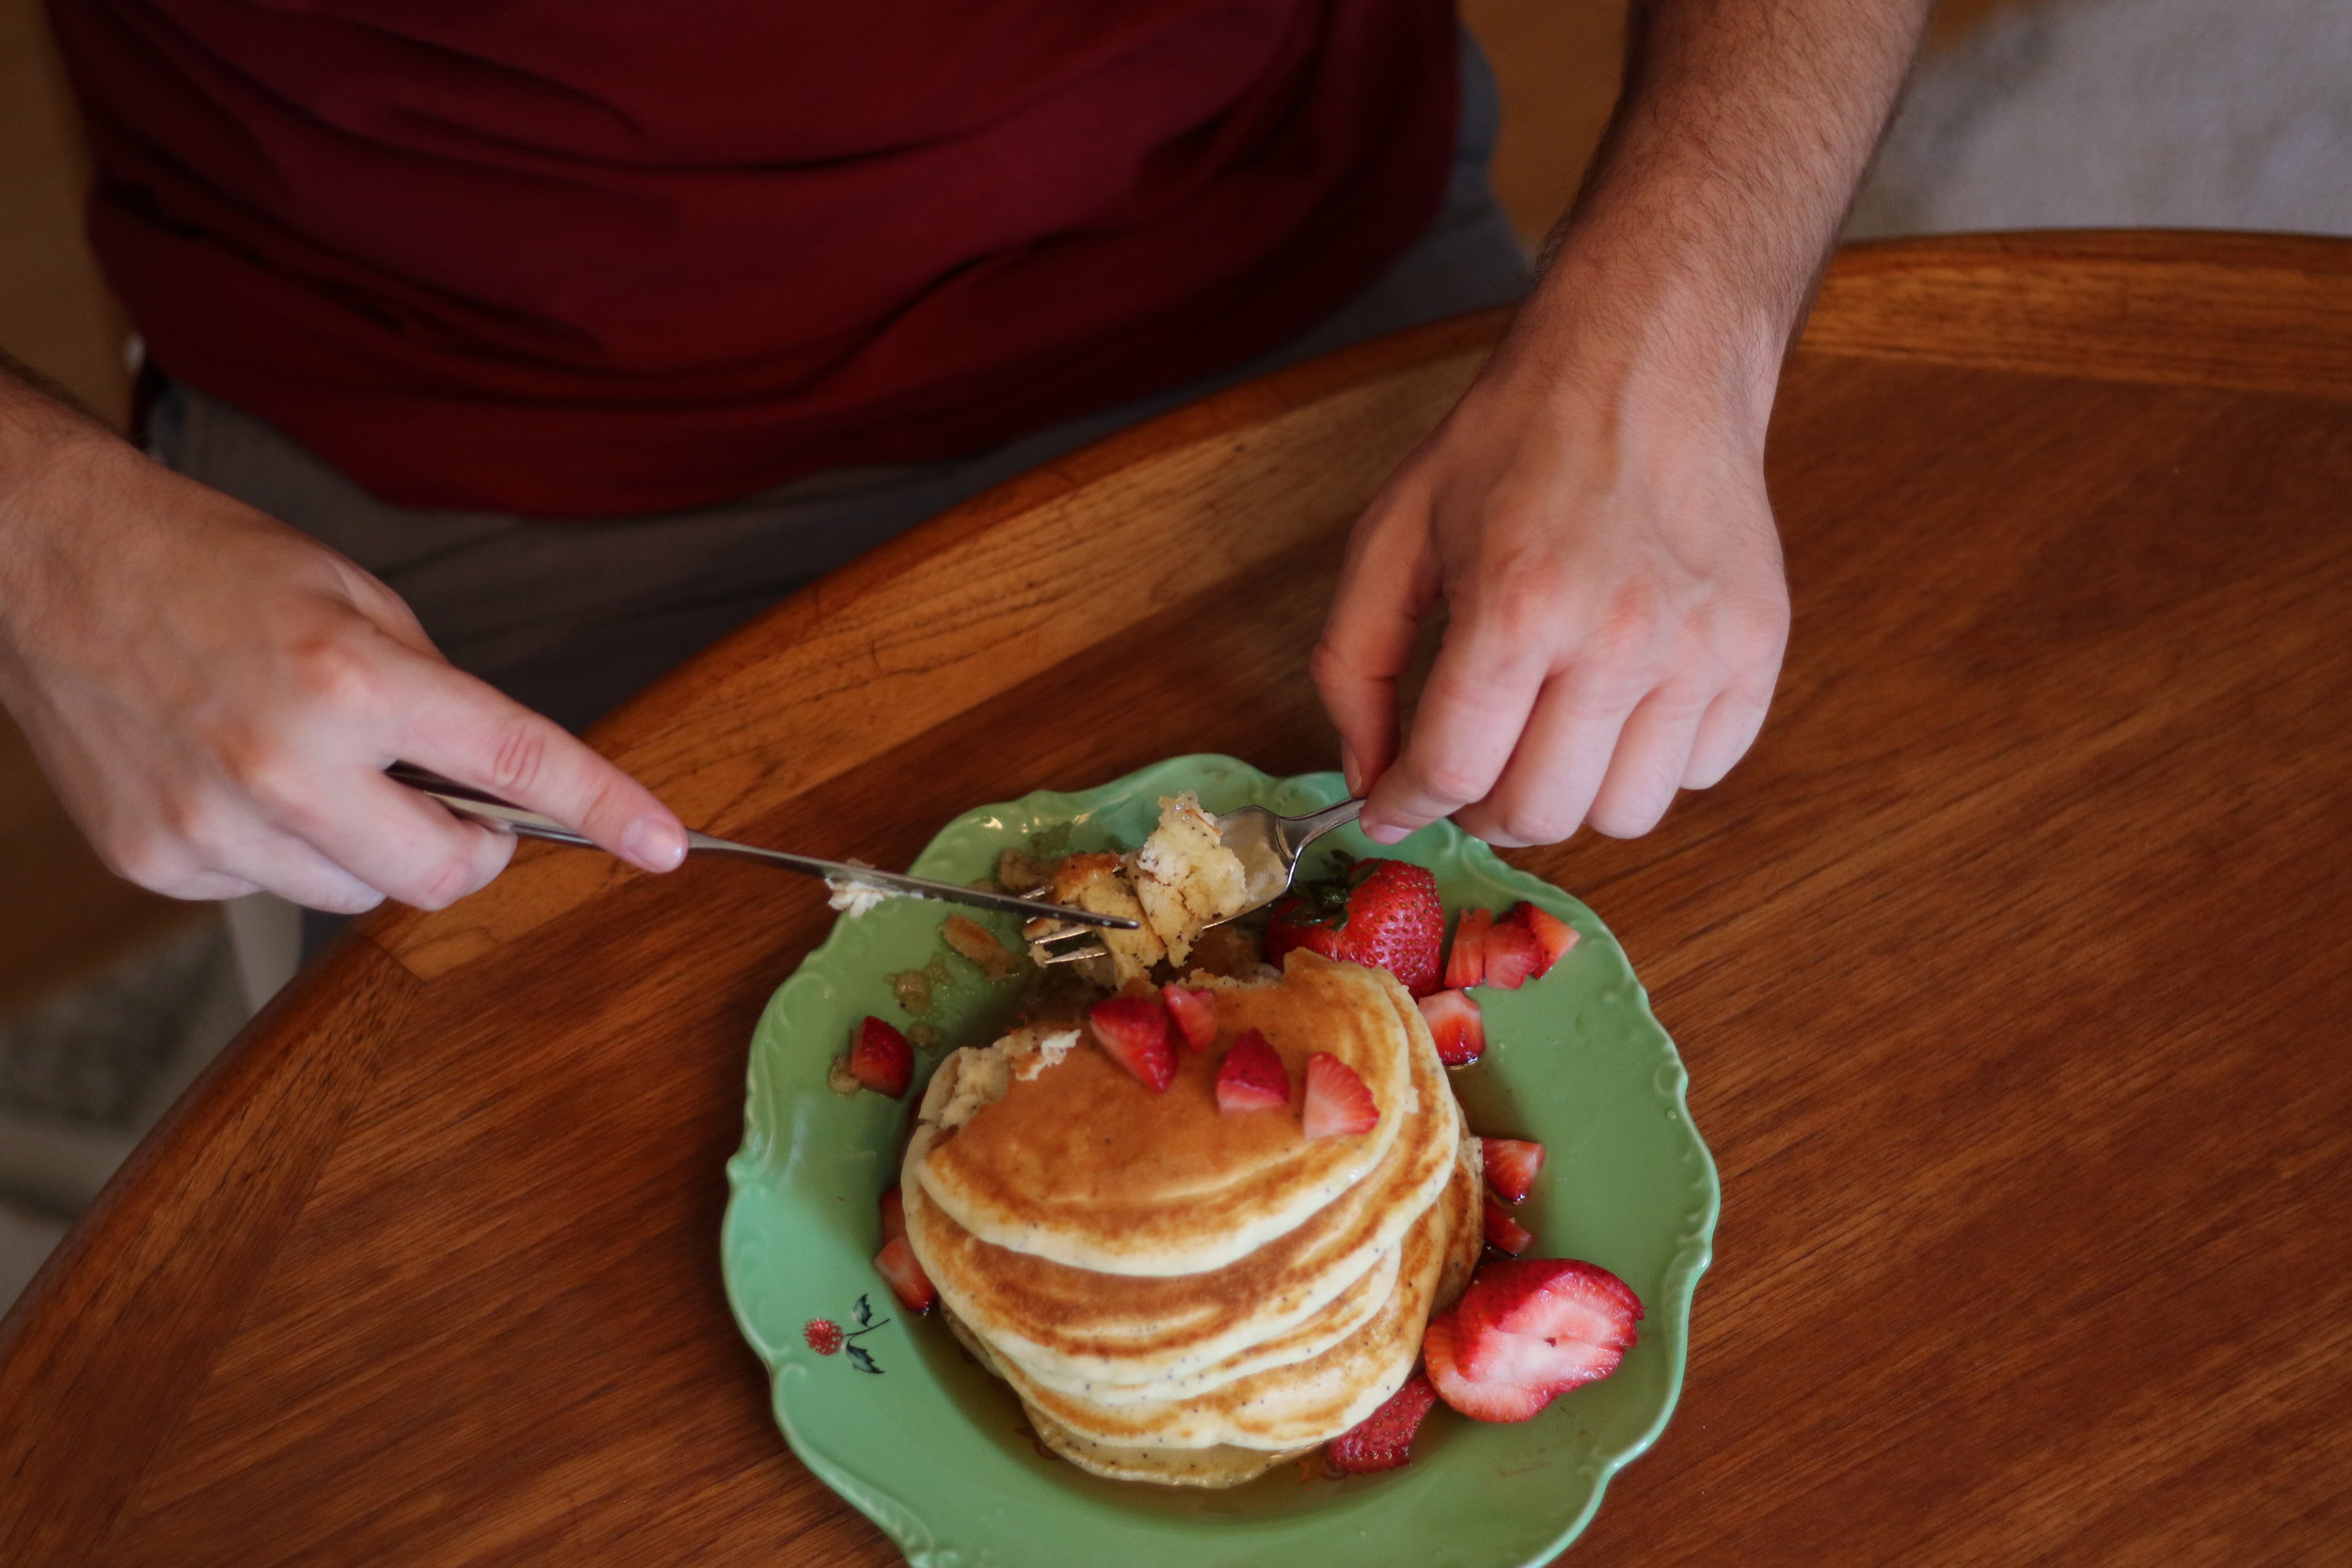 Alt text: a bird’s eye view of white hands holding silverware and cutting into a stack of 5 pancakes sit on a pretty green plate, covered in syrup and cut strawberries